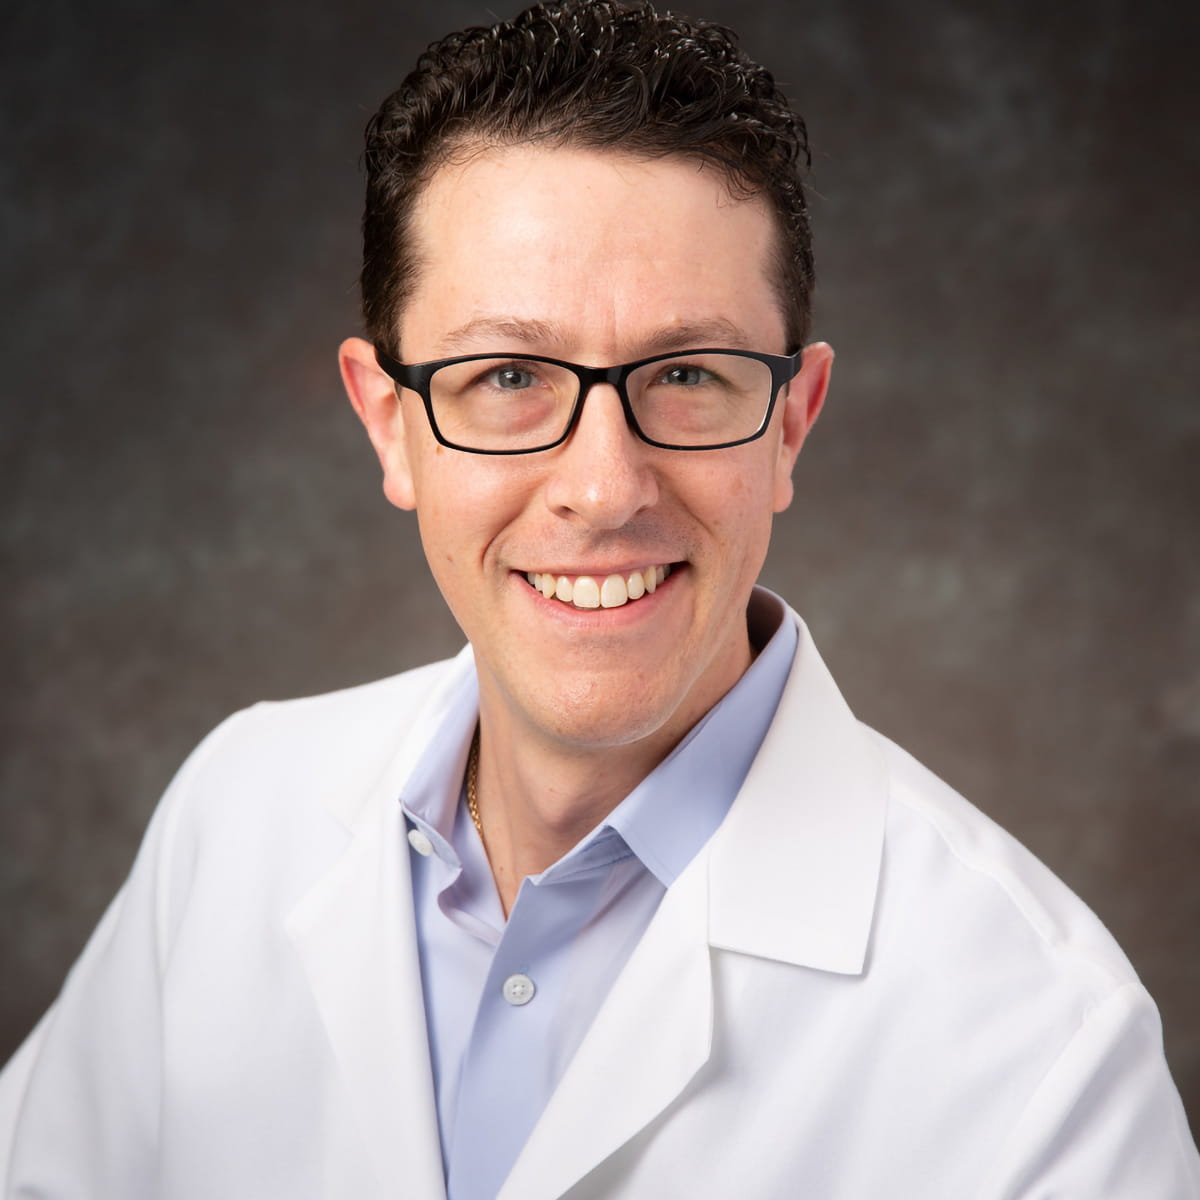 A friendly headshot of Justin Kunes, MD